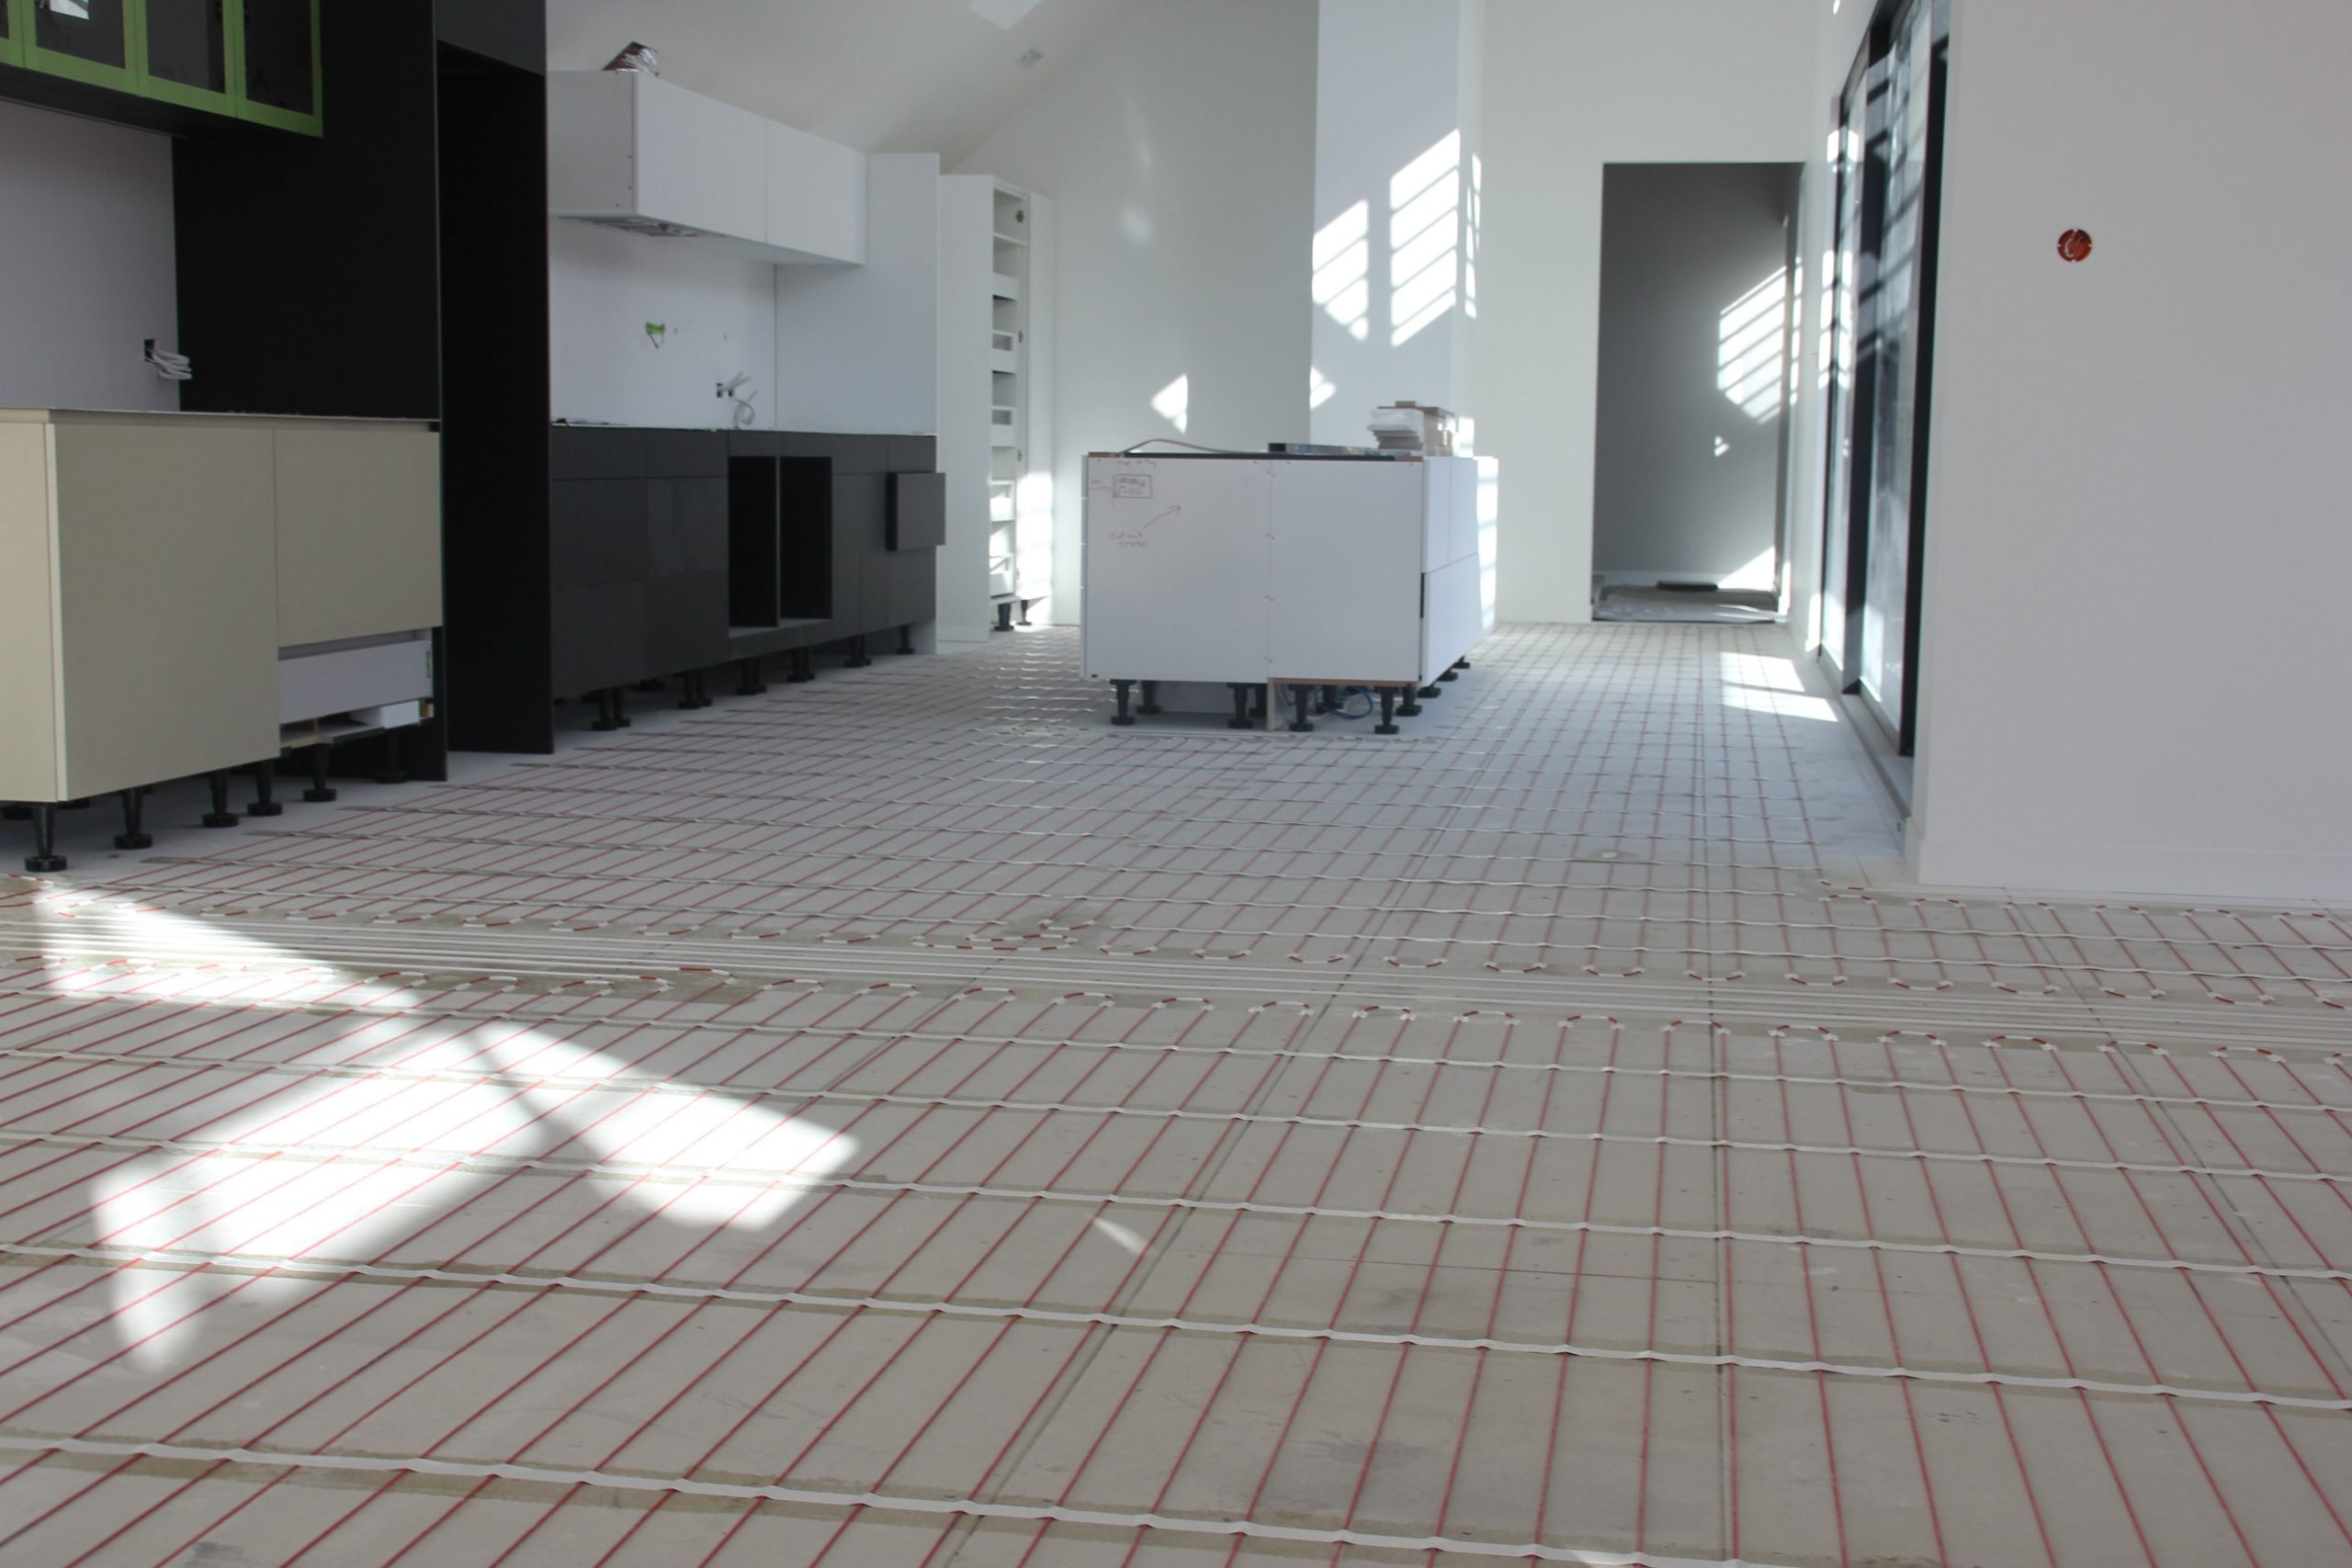 Installation of Thermafloor do it yourself electric undertile heating systems, New Zealand